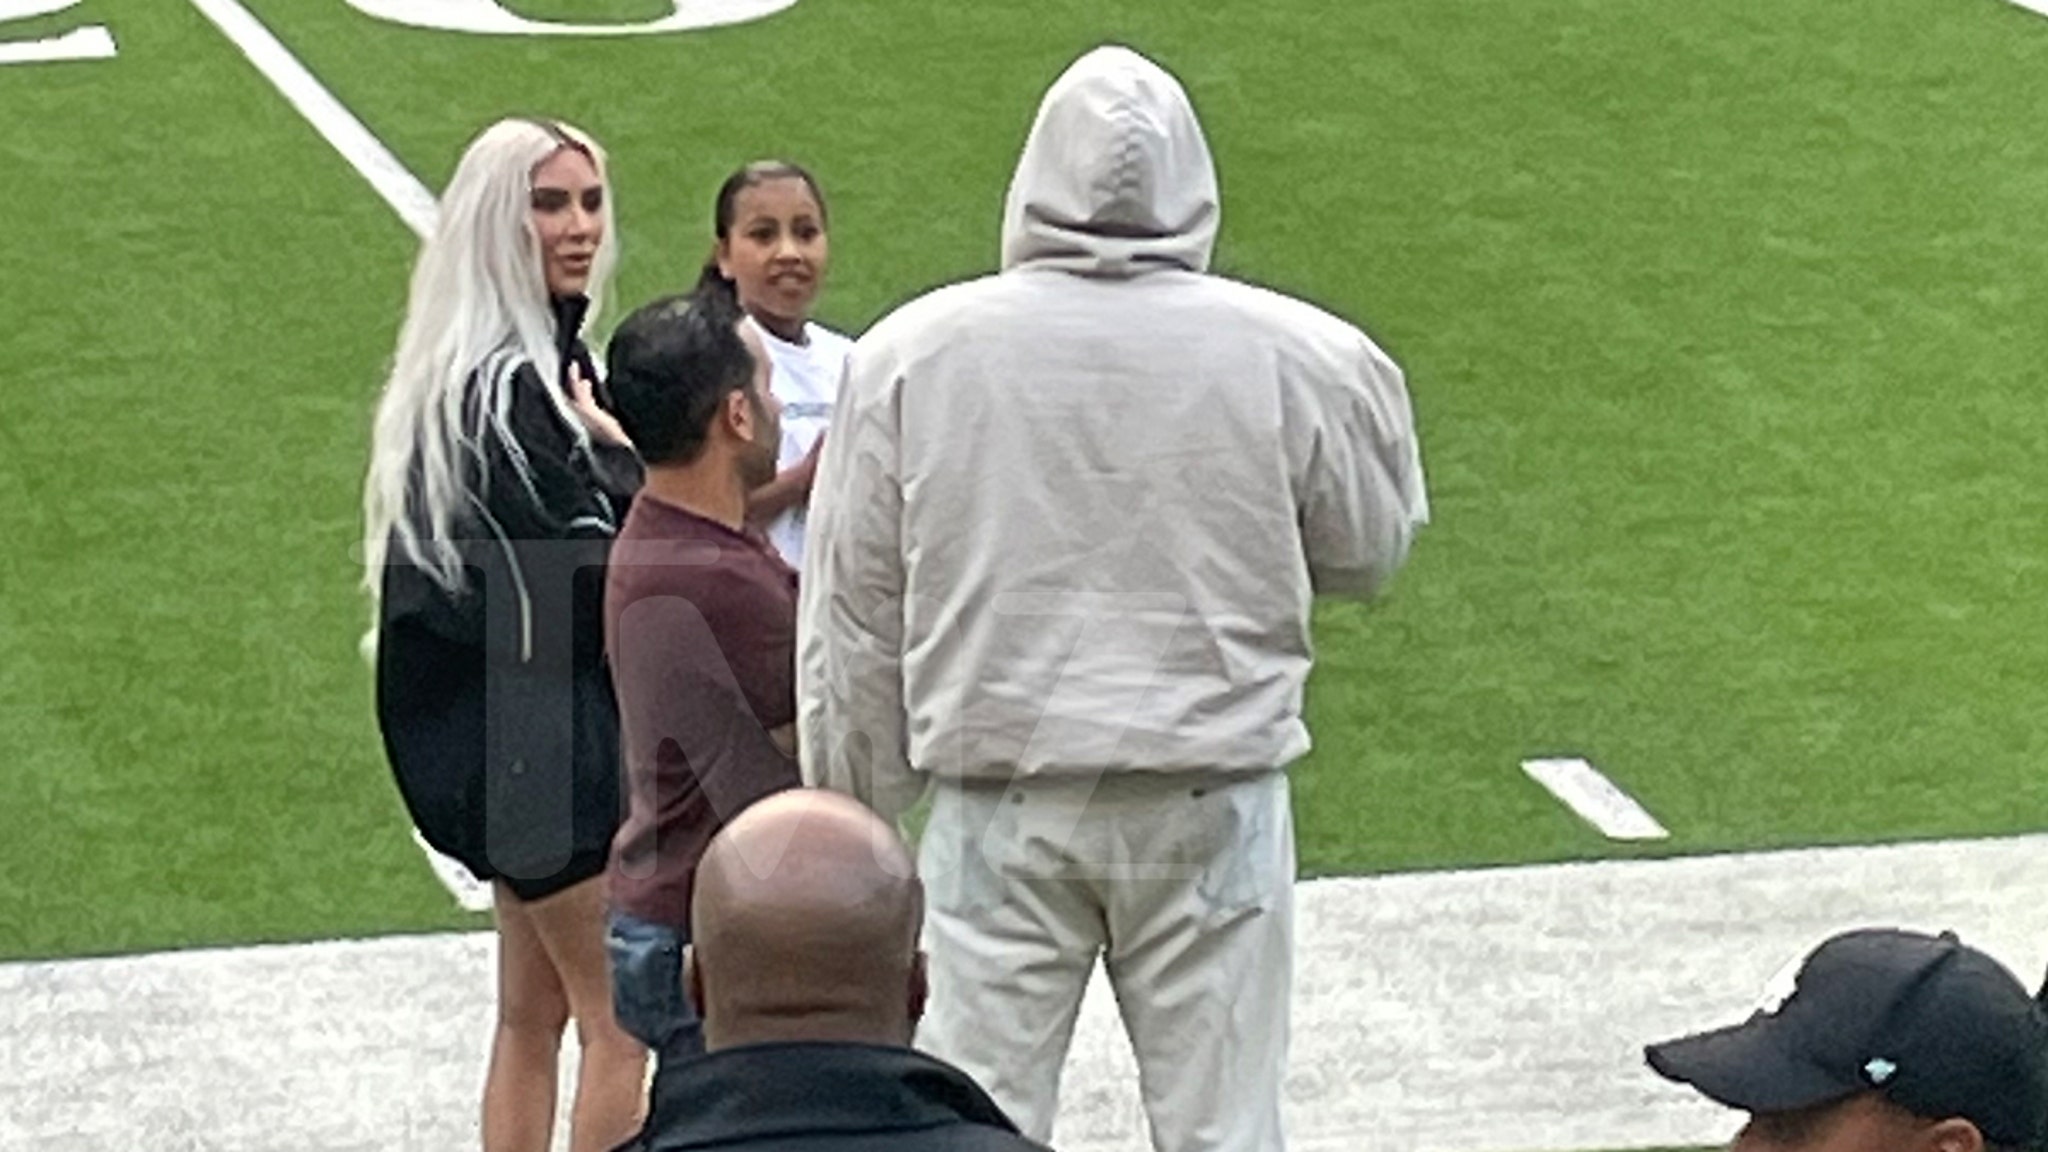 Kim Kardashian and Kanye West Attend Saint’s Football Game Chat on Sidelines – TMZ